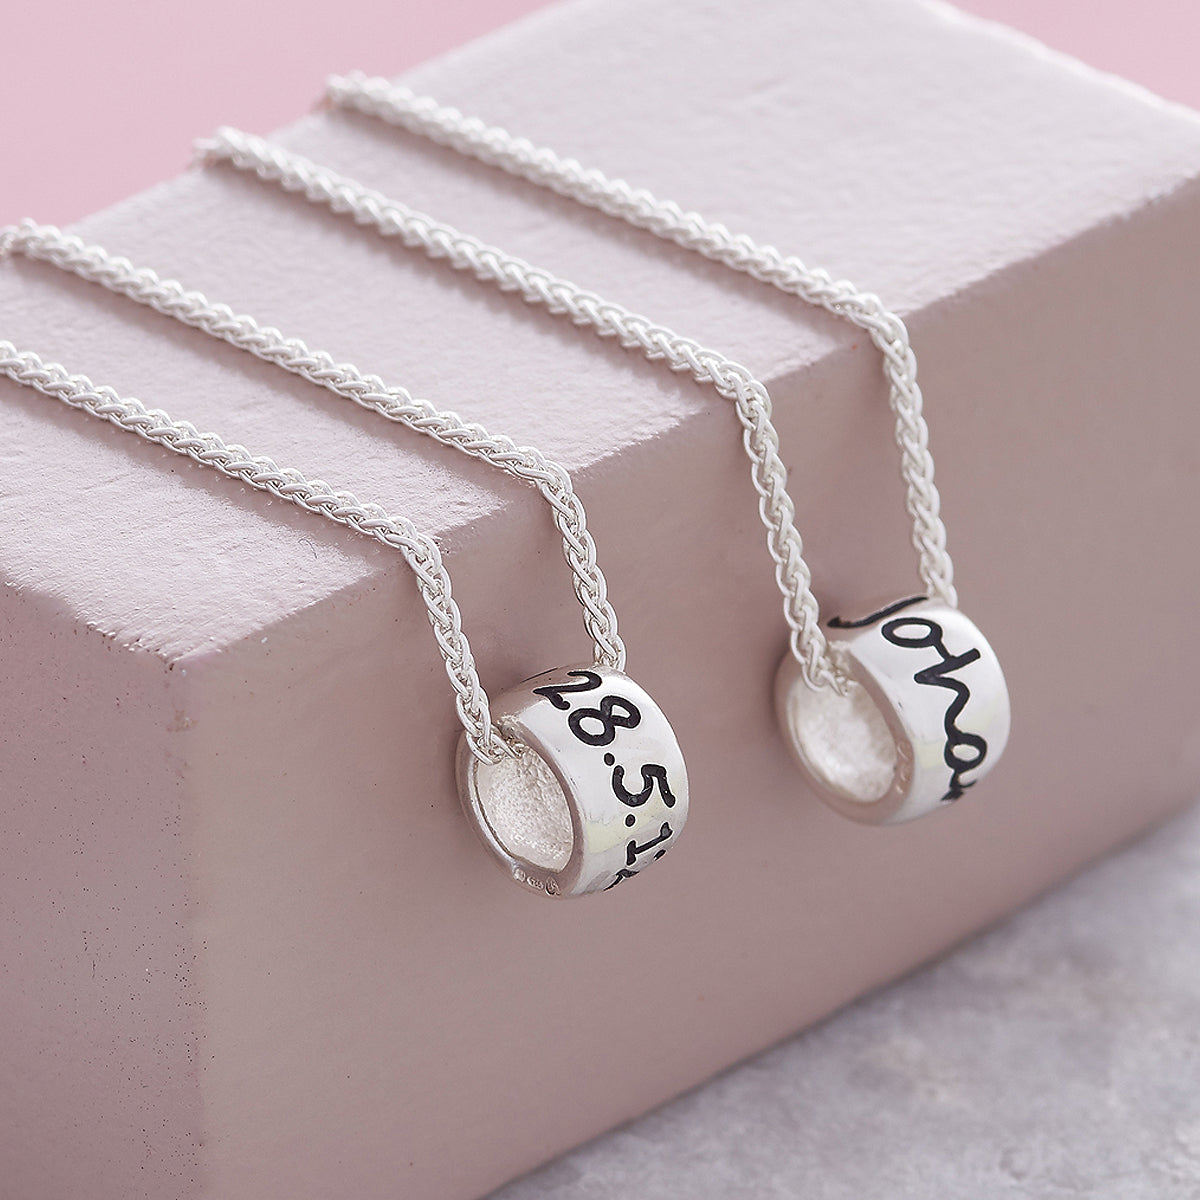 Personalised Silver Engraved Charm Bead Designer Charms on a silver necklace